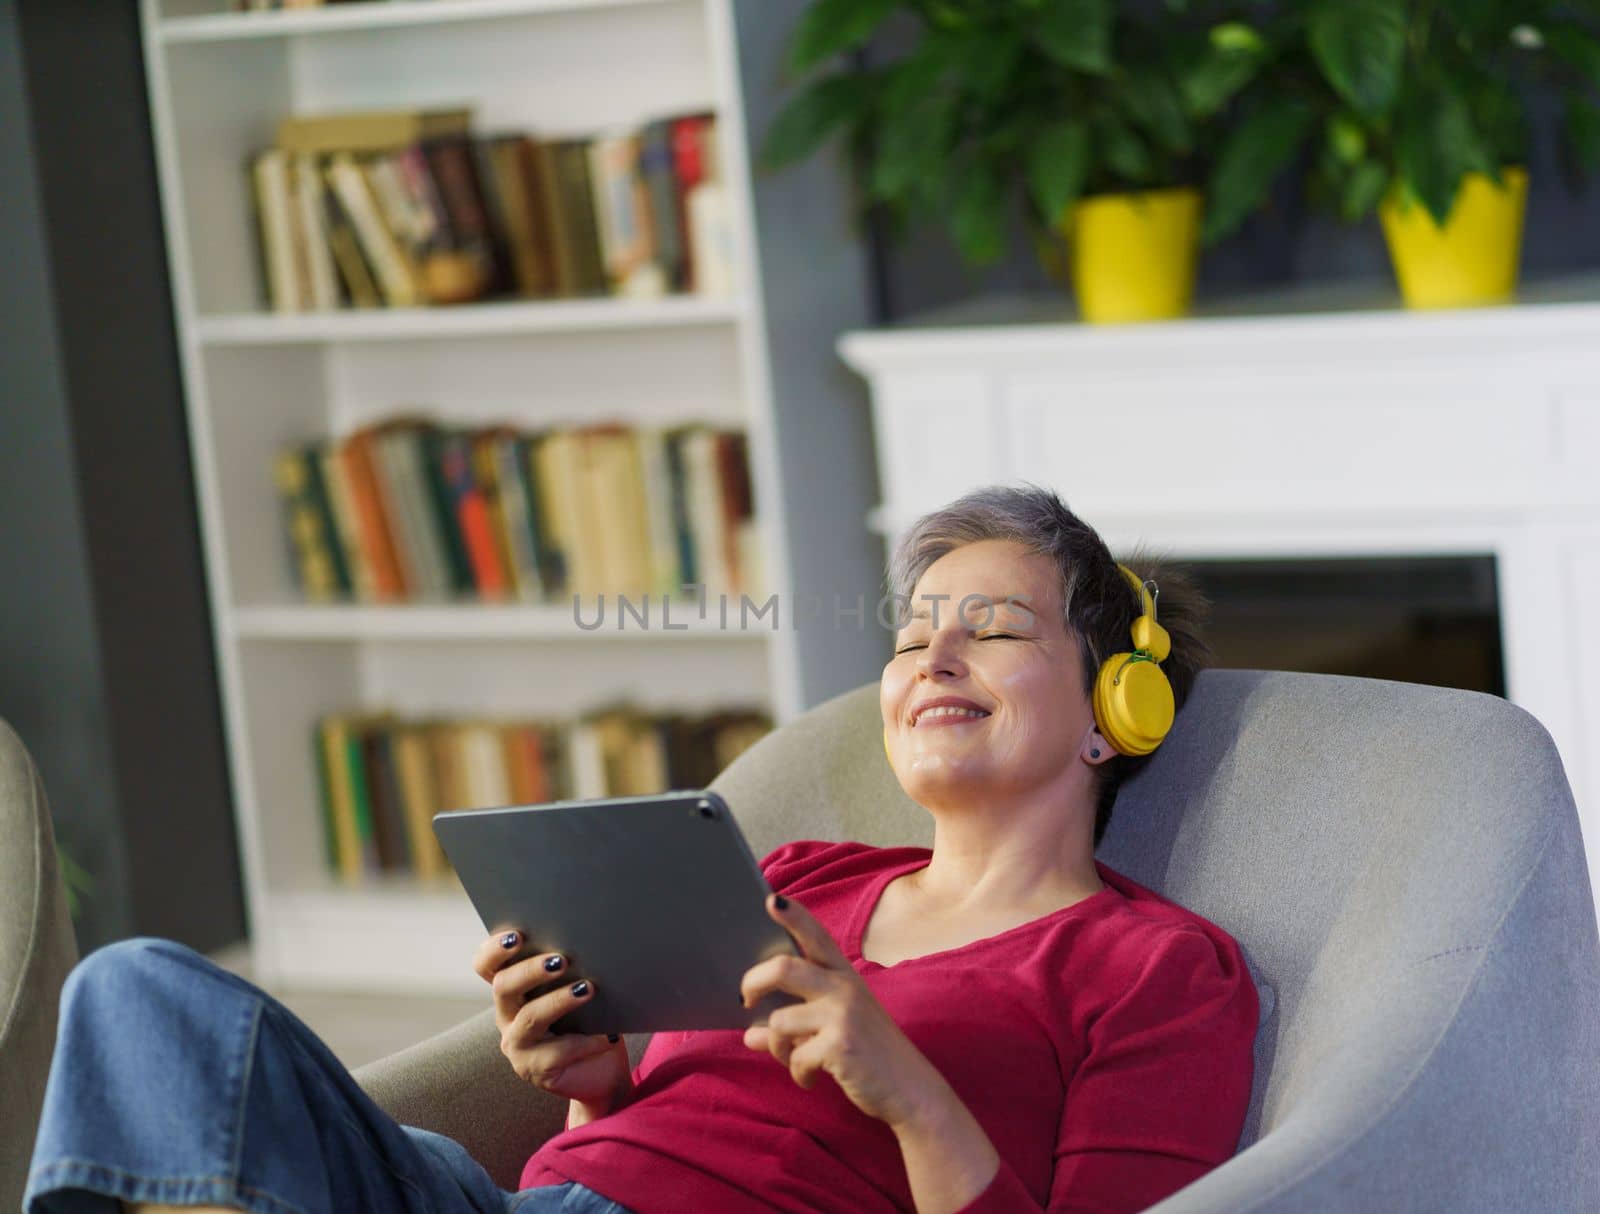 Serene, mature woman with grey hair enjoying her leisure time indoors while listening to music through headphones and holding a tablet in her hands. She appears relaxed and content, displaying the peacefulness by LipikStockMedia